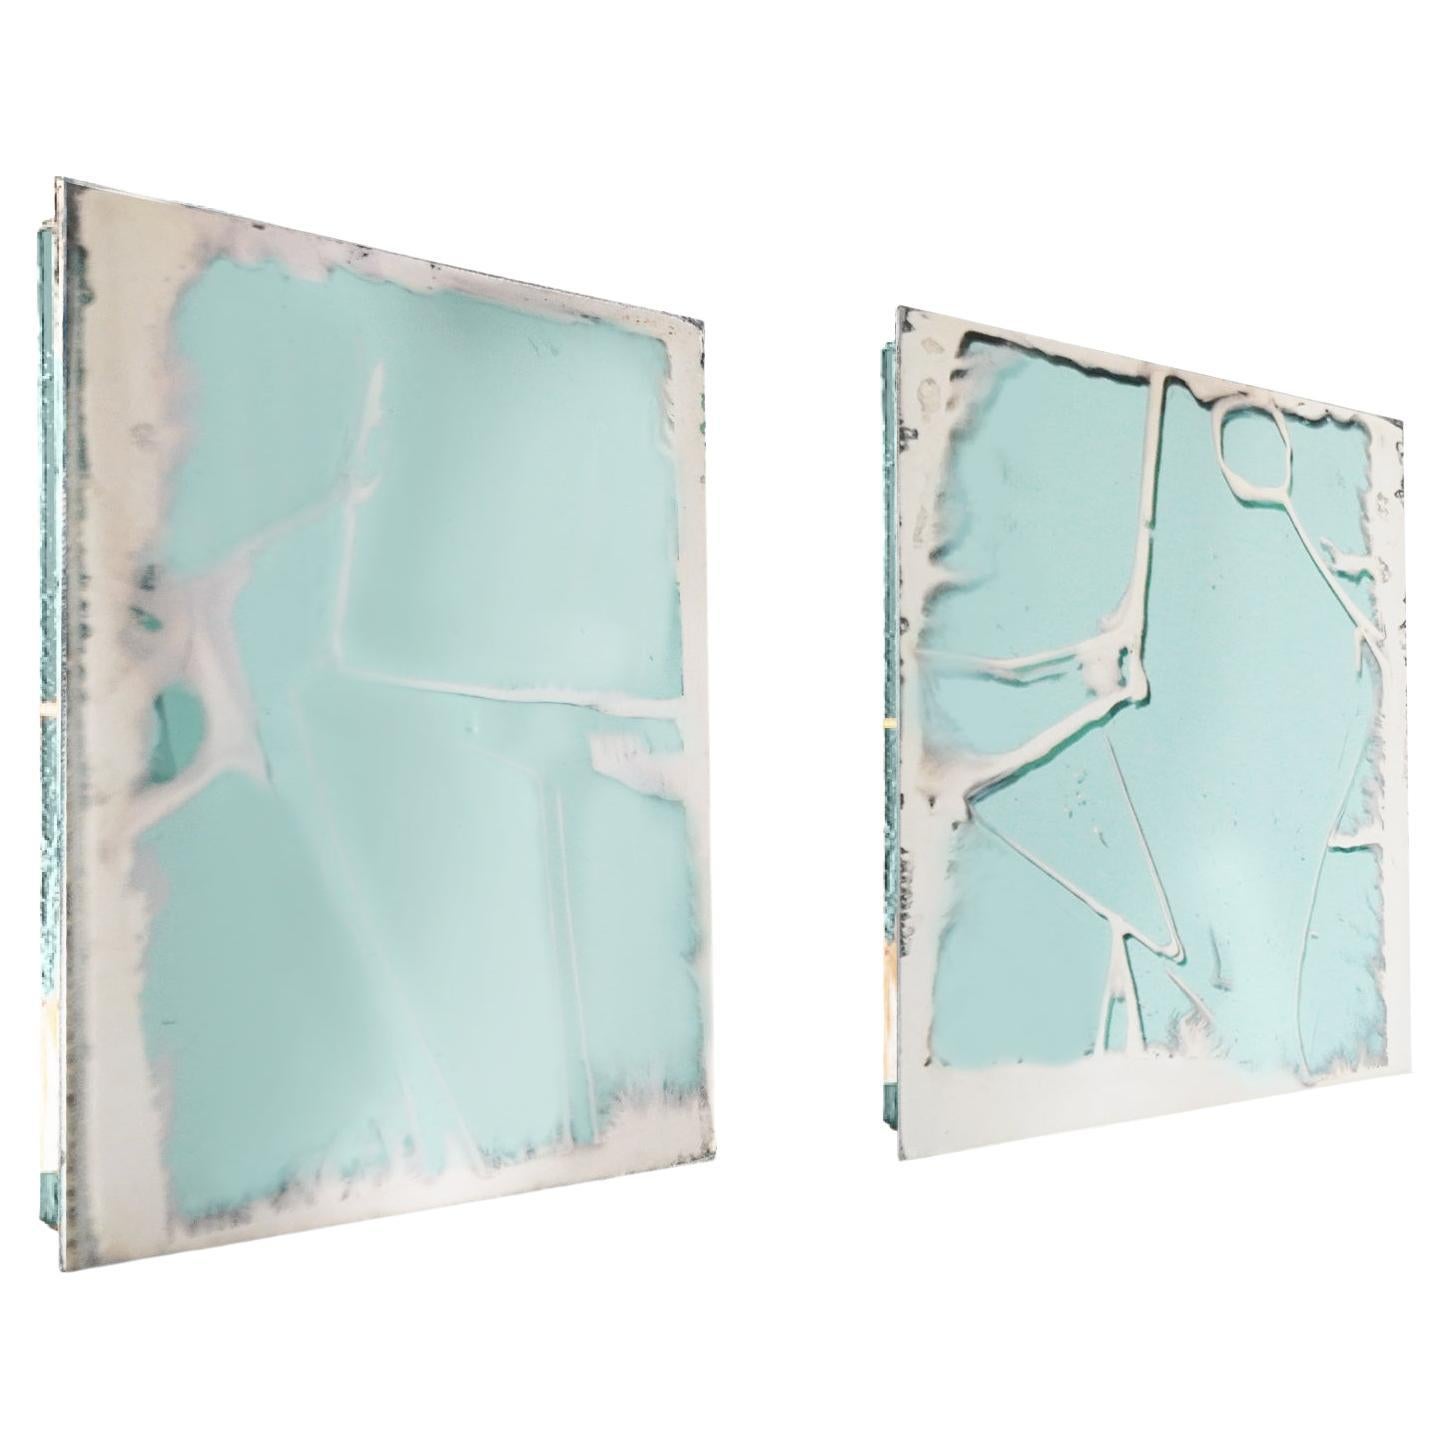 "Shiny" sculpture contemporary mirror 70 cm, art glass silvering, jade color For Sale